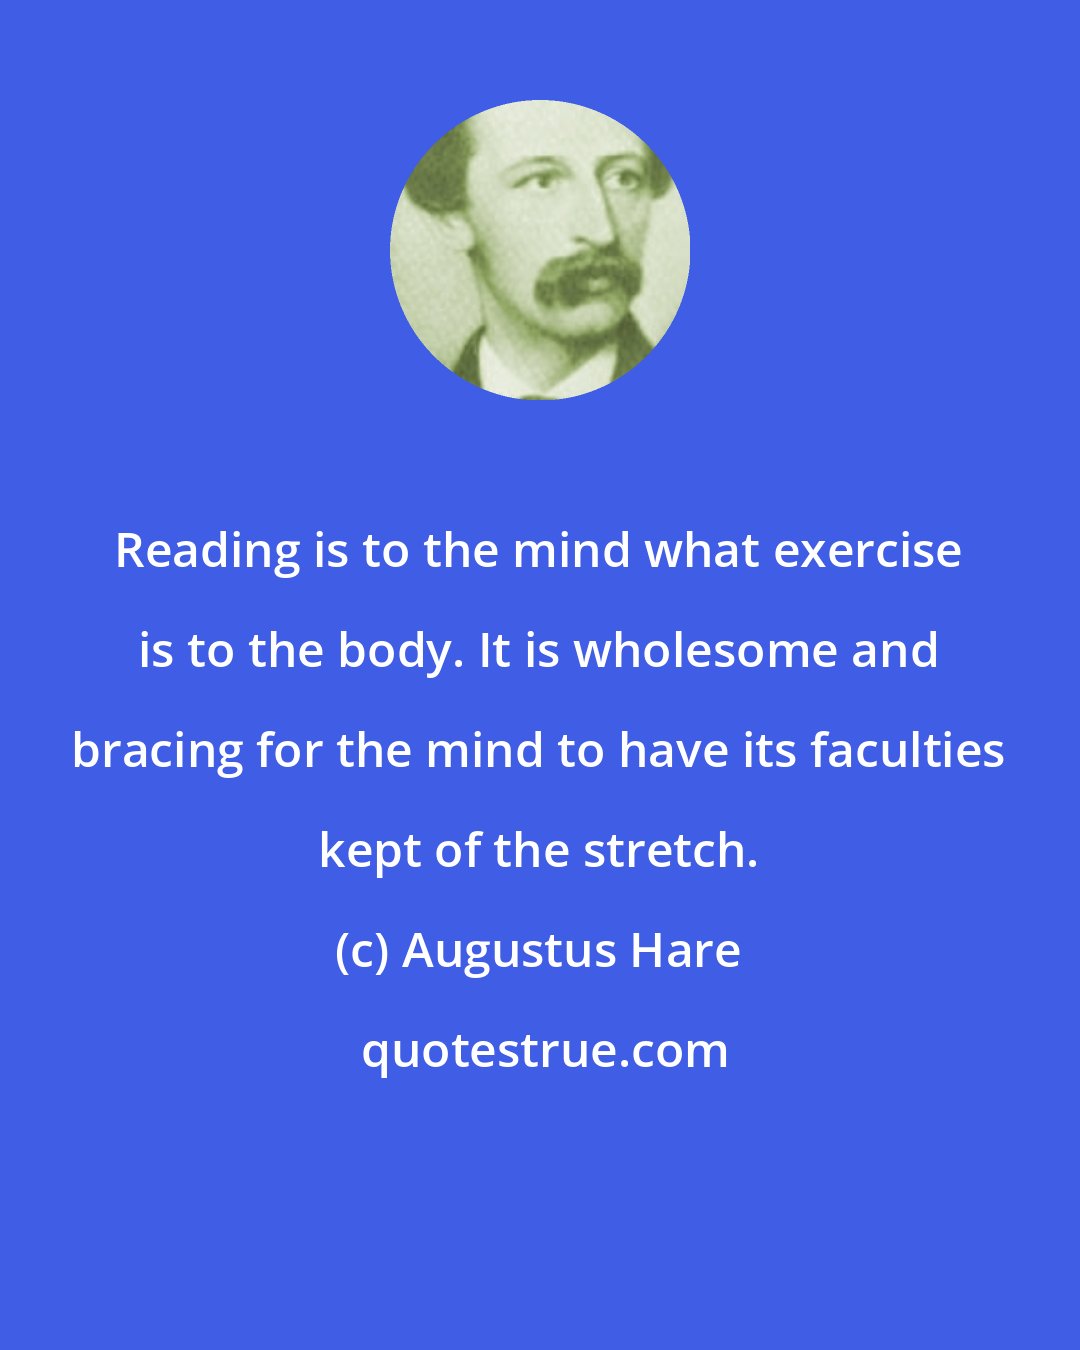 Augustus Hare: Reading is to the mind what exercise is to the body. It is wholesome and bracing for the mind to have its faculties kept of the stretch.